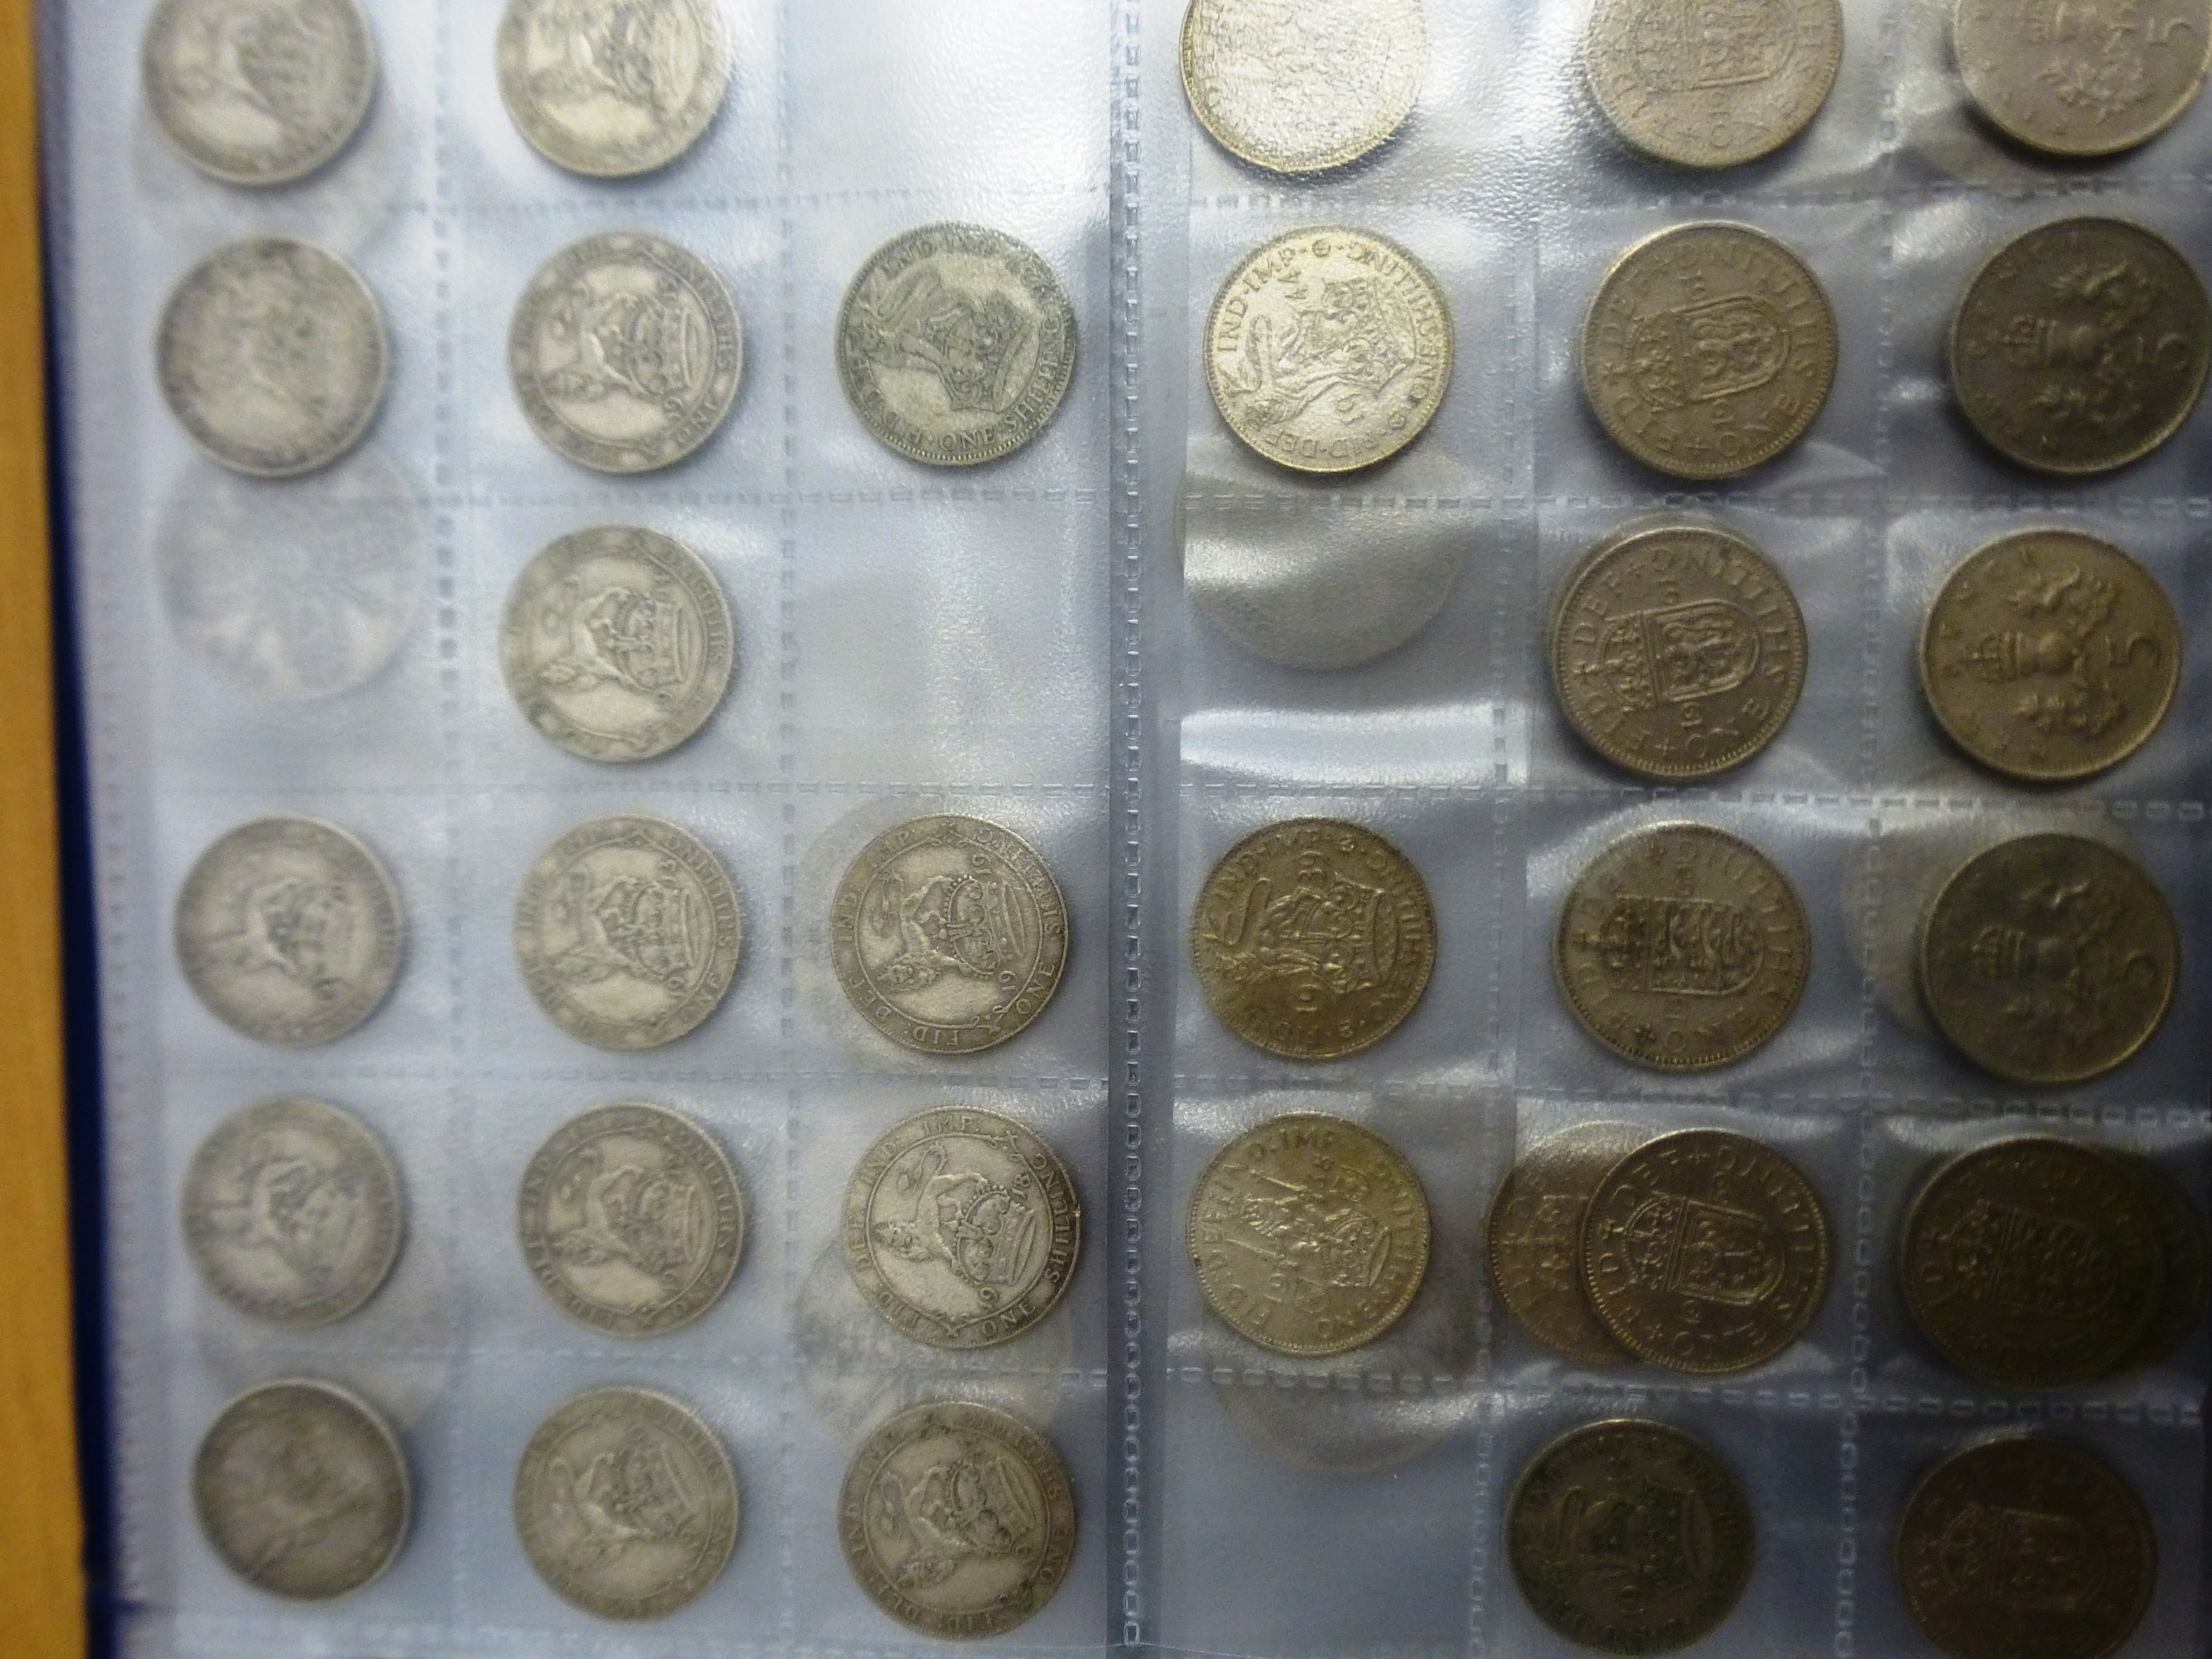 COIN ALBUM OF ASSORTED COINS AND BANK NOTES MOSTLY UK INCLUDING SILVER COINAGE AND 1890 CROWN - Image 8 of 11